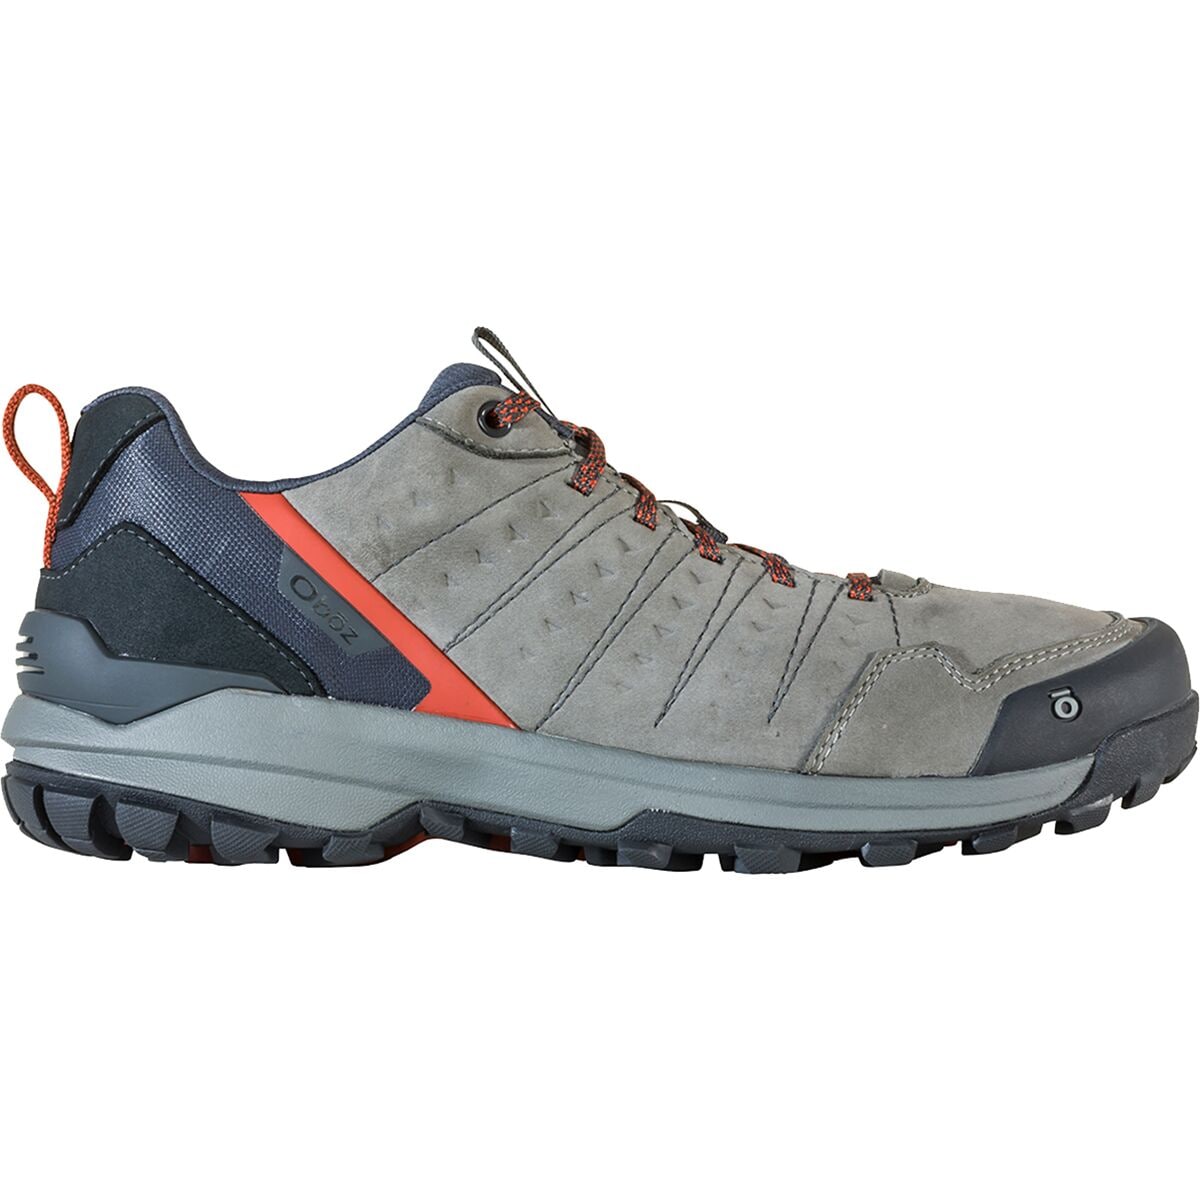 Oboz Sypes Low Leather B-DRY Wide Hiking Shoe - Men's